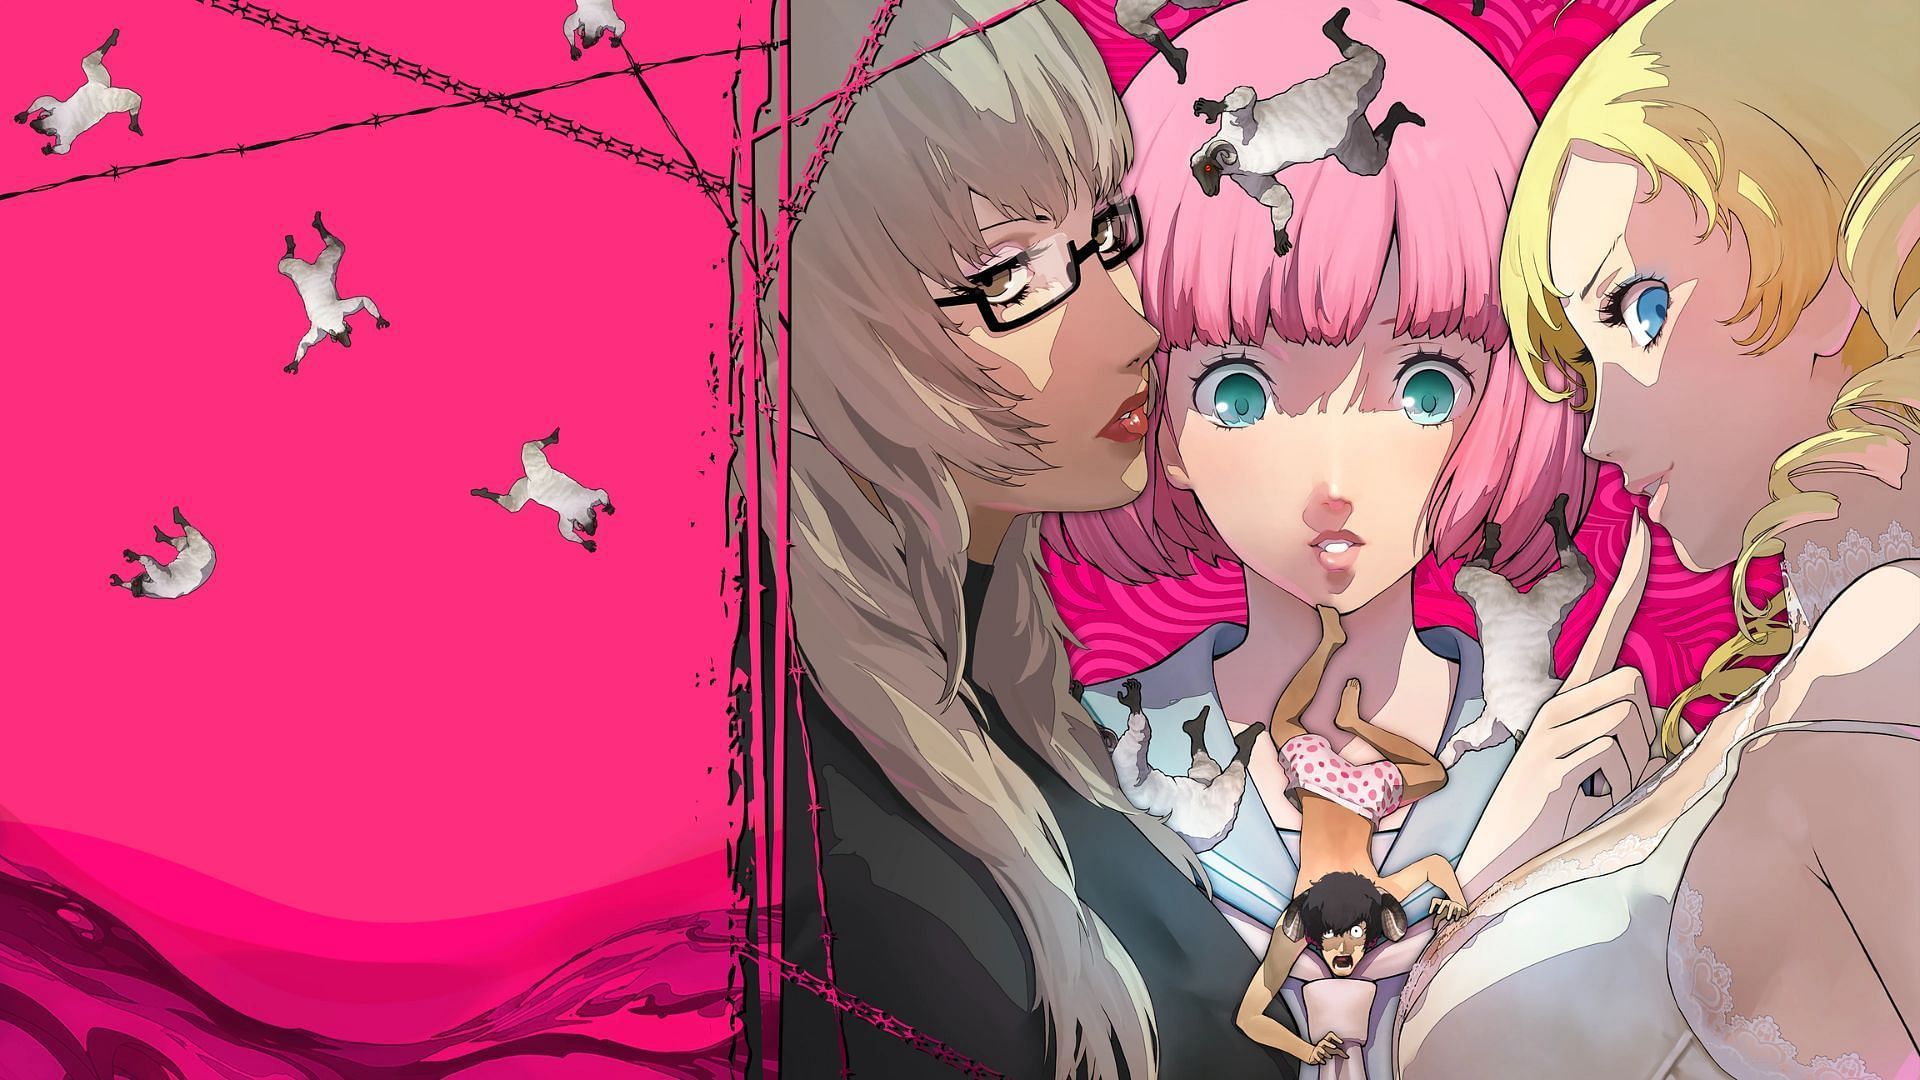 Get Platinum on the PS5 in Catherine Full Body, which debuted in 2019 (Image via Atlus)